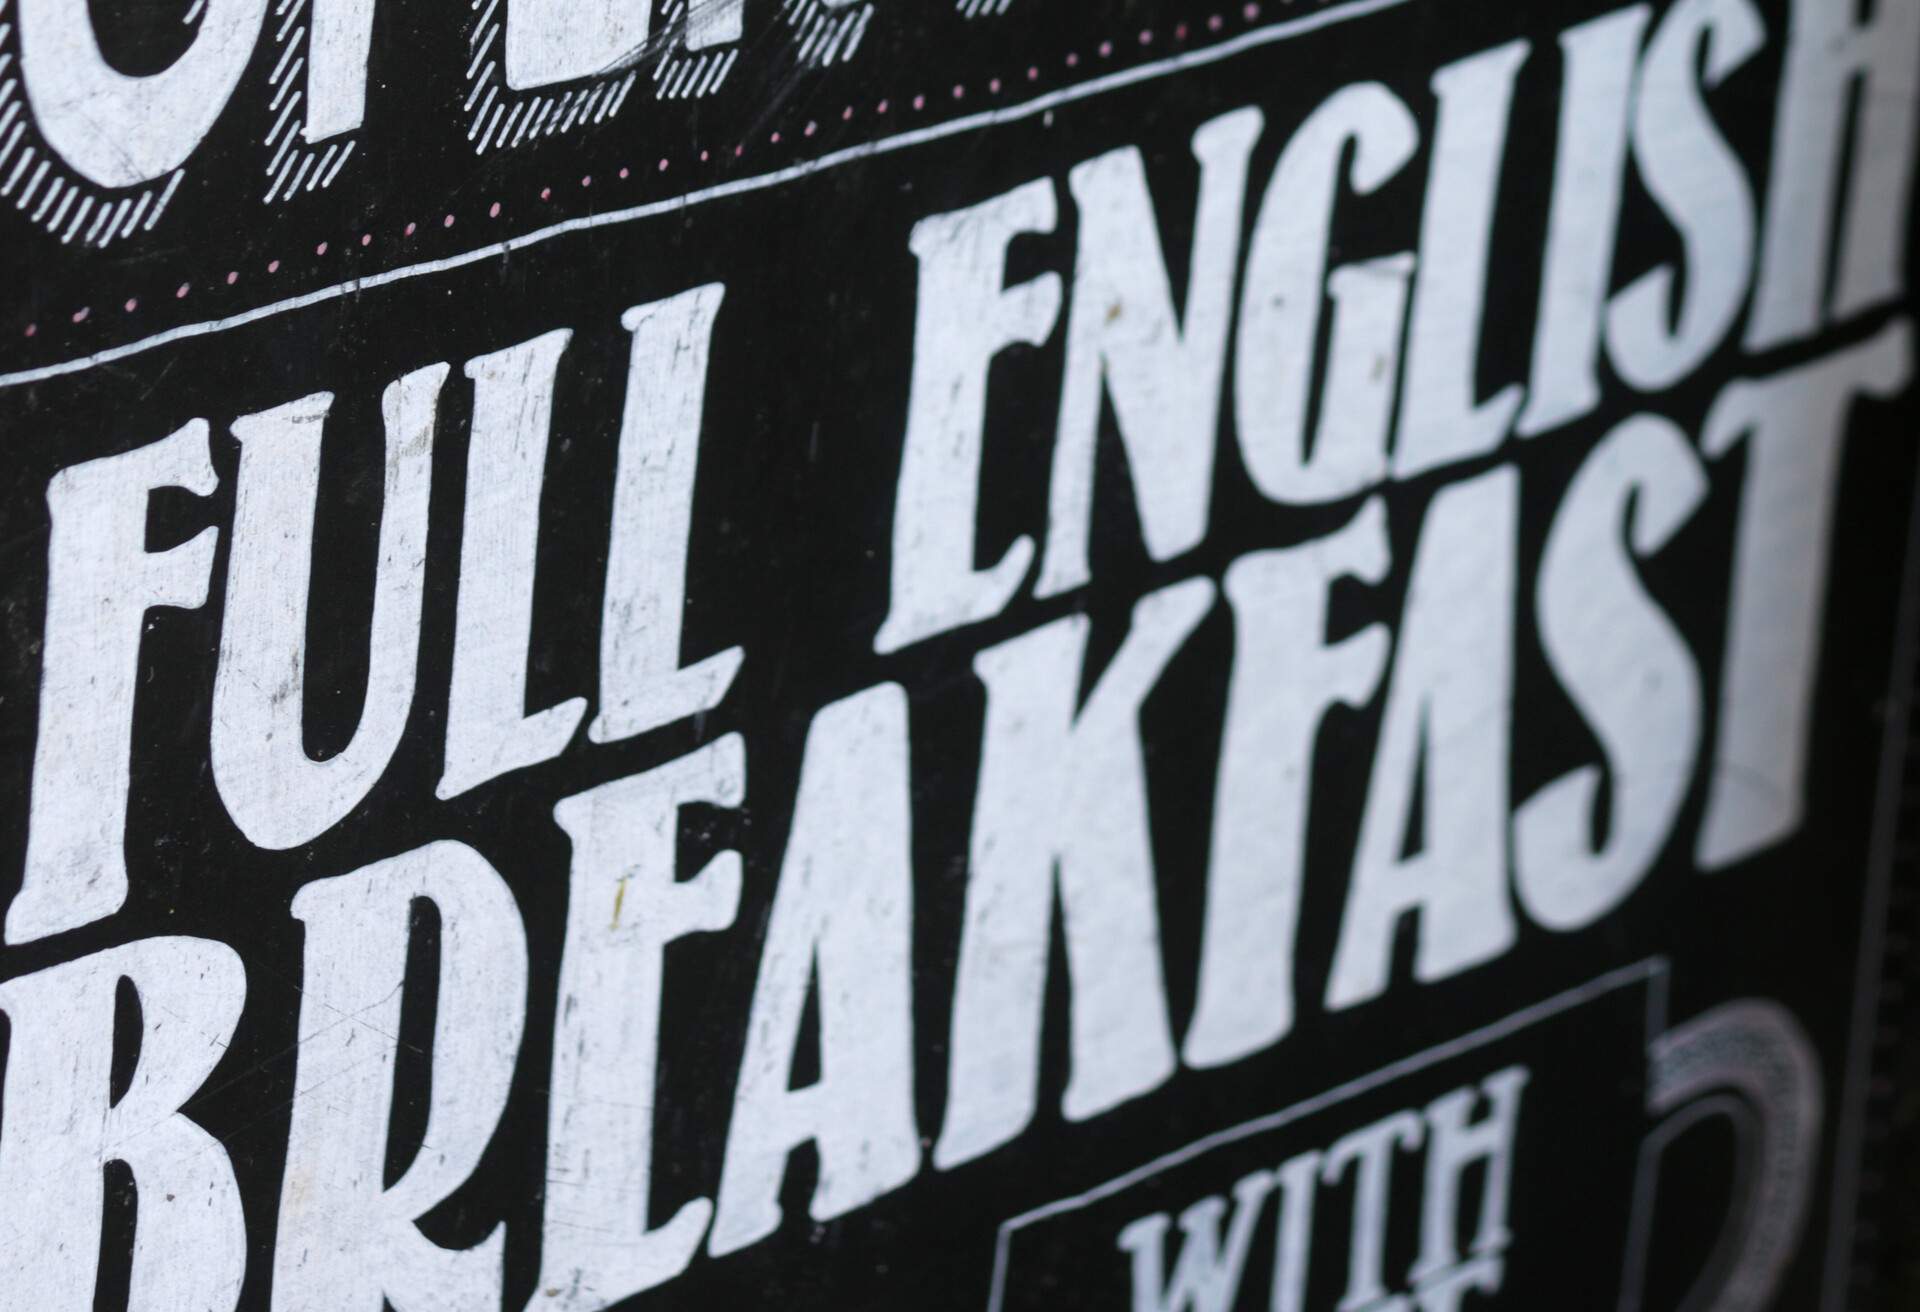 Stock photo of cafe restaurant sign / signpost saying saying full English breakfast on black chalkboard with white writing, selling traditional fried breakfast fry up with sausages and bacon, cup of tea and fried eggs, unhealthy English breakfast food